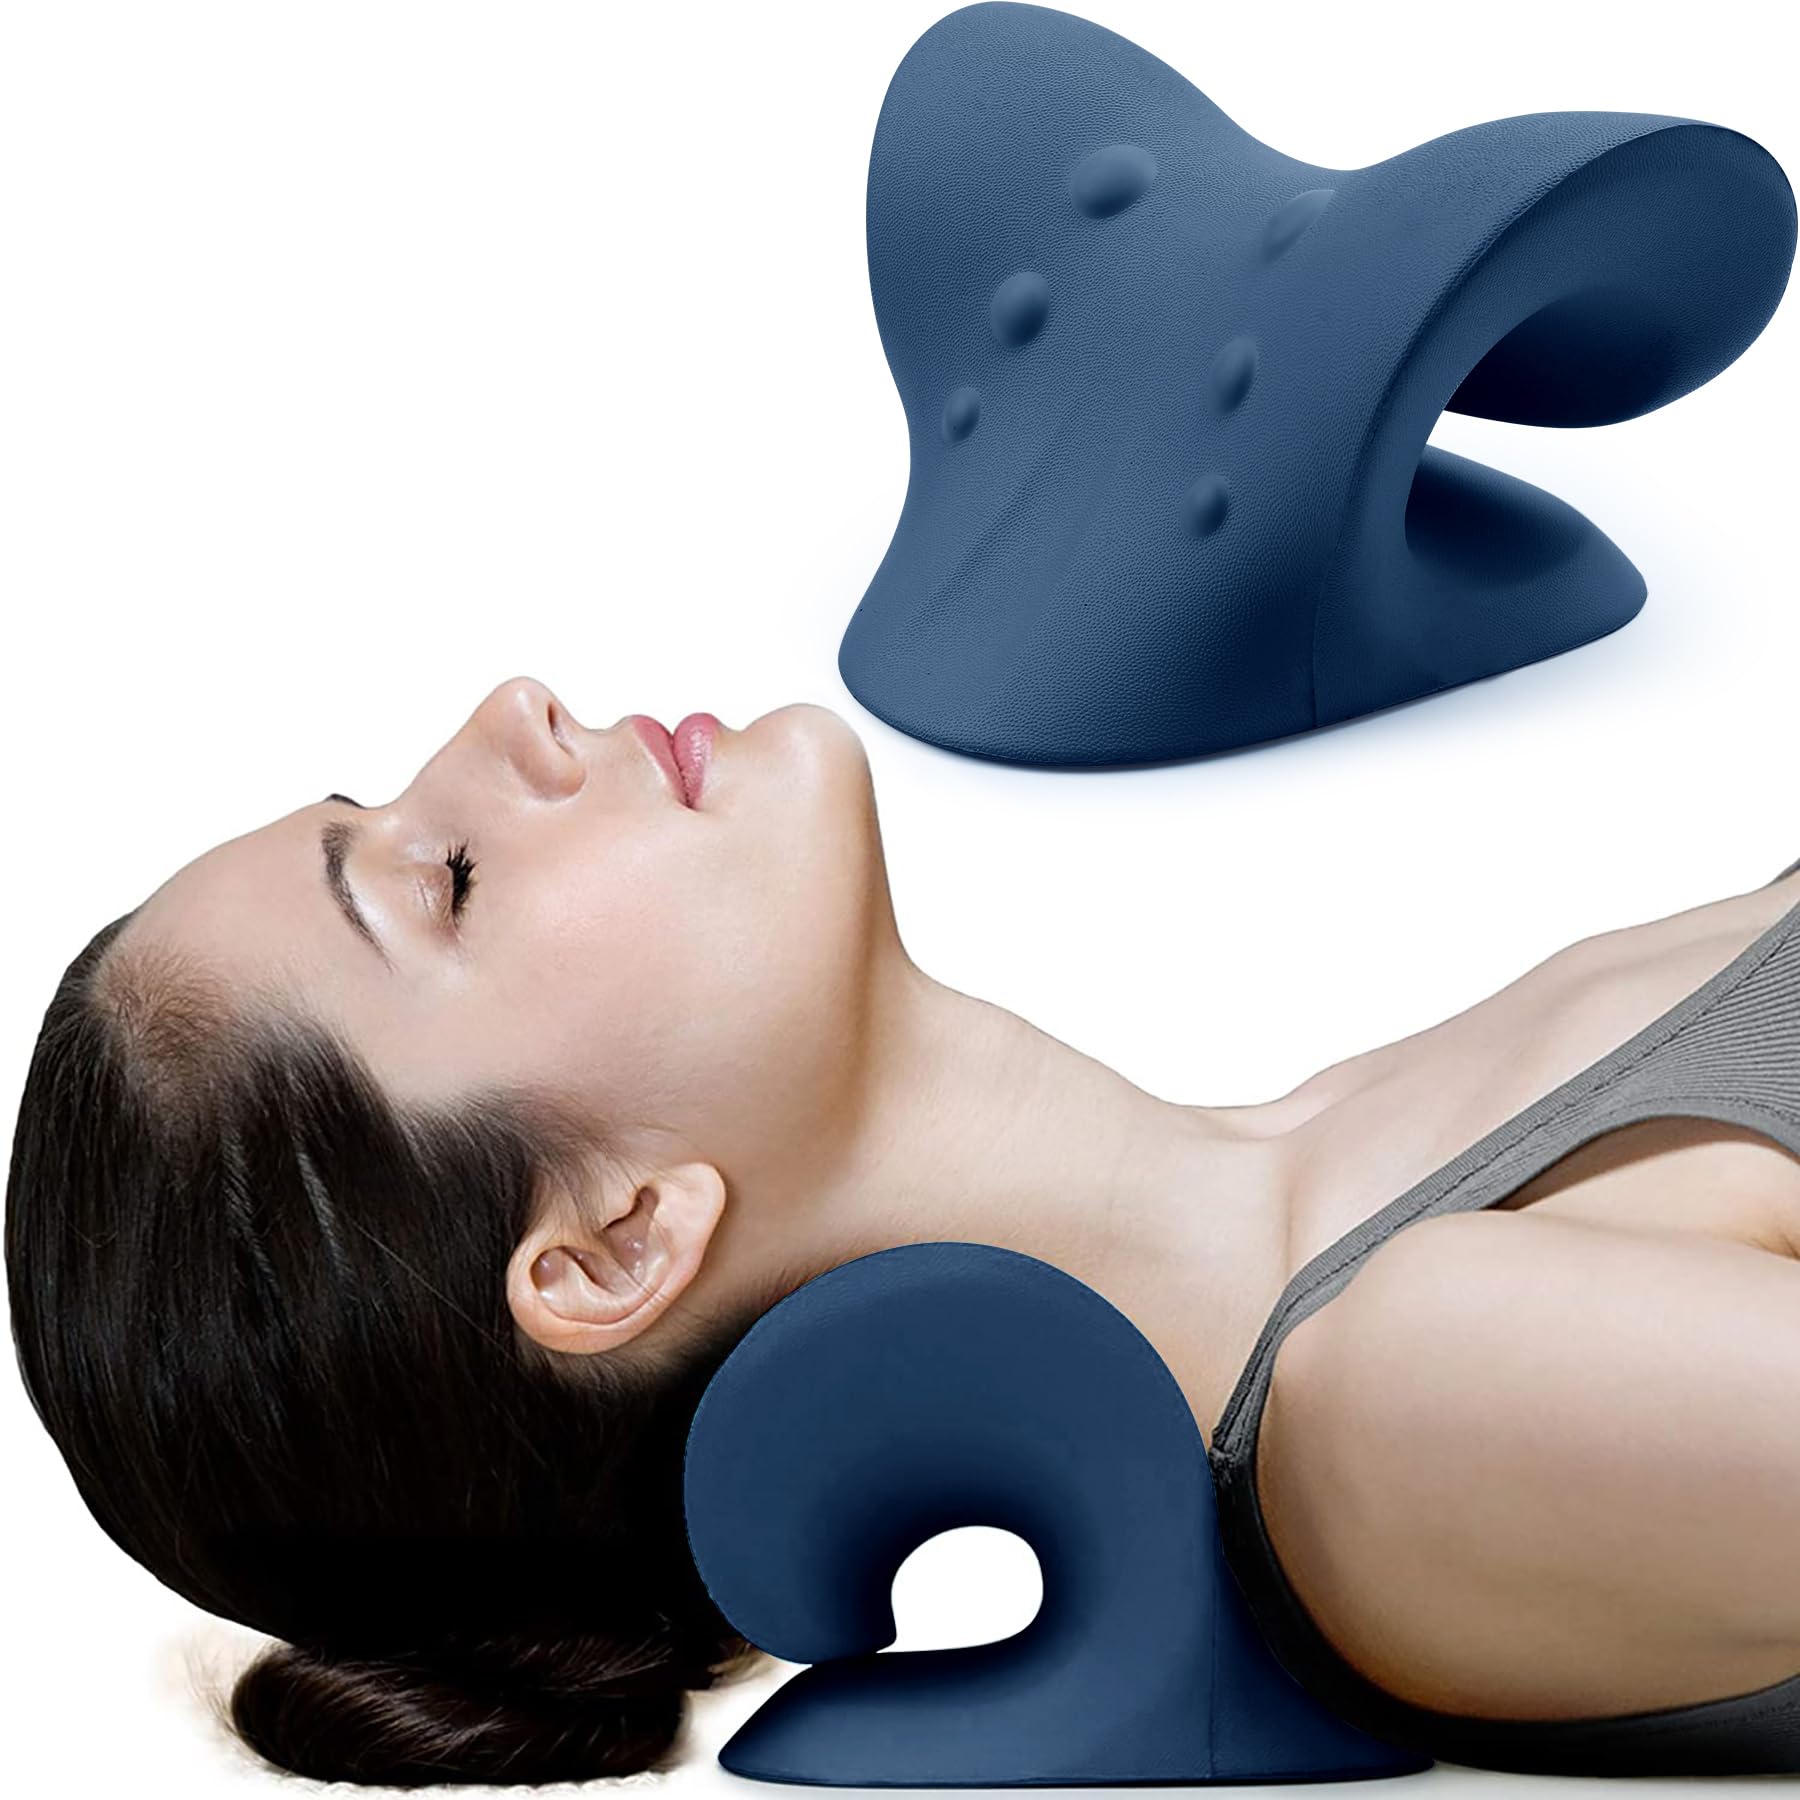 RESTCLOUD Neck and Shoulder Relaxer, Cervical Traction Device for TMJ Pain Relief and Cervical Spine Alignment, Chiropractic Pillow, Neck Stretcher (Dark Blue)